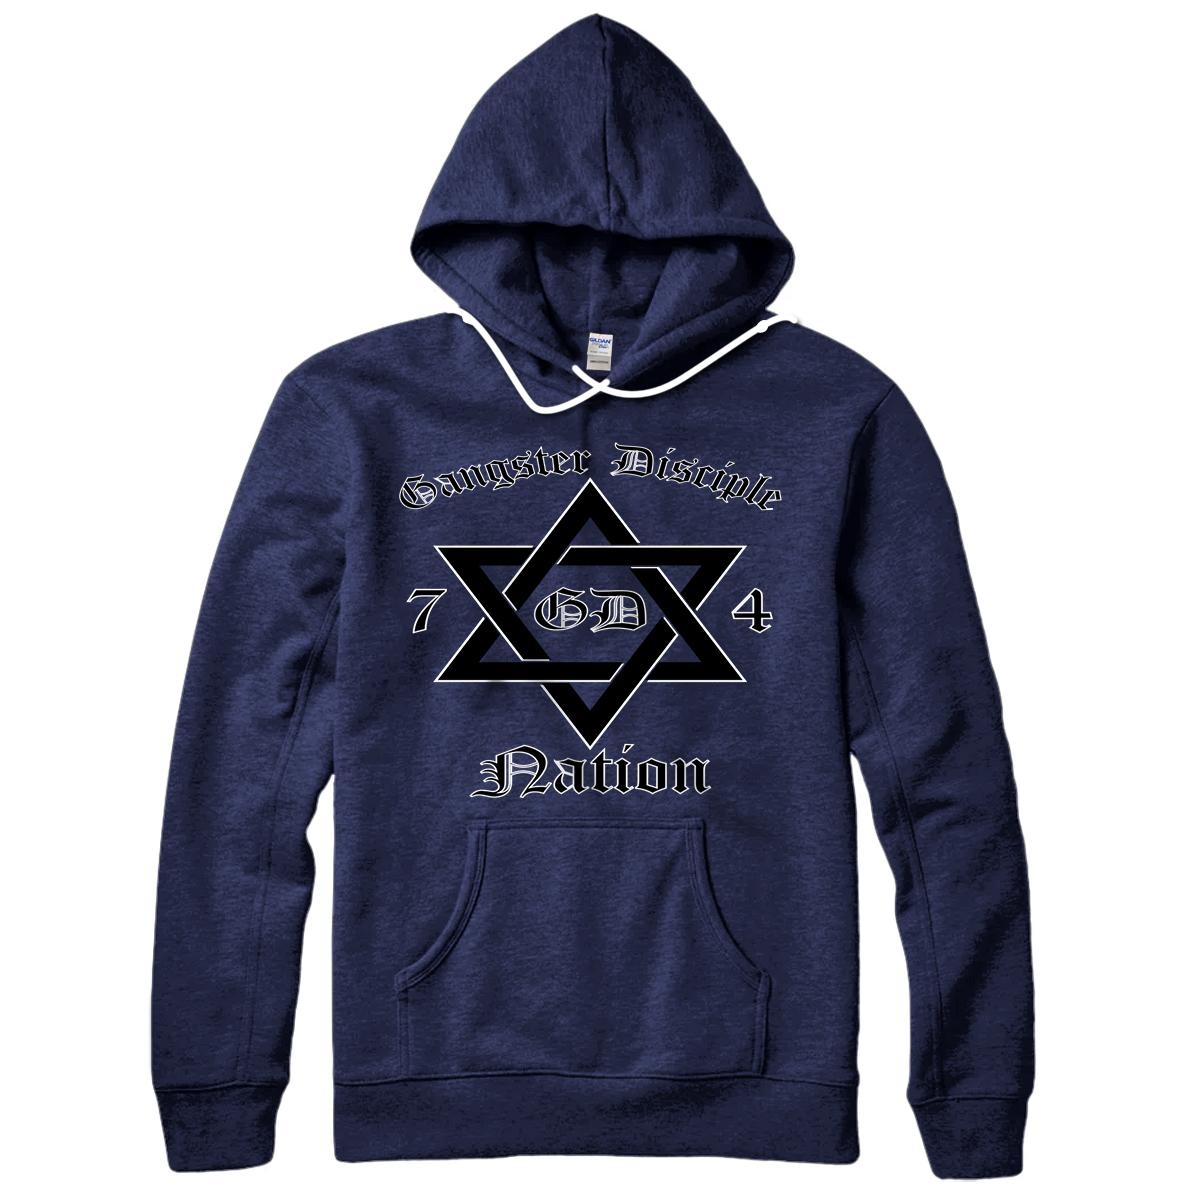 Gangster Disciple Nation Pullover Hoodie - All Star Shirt